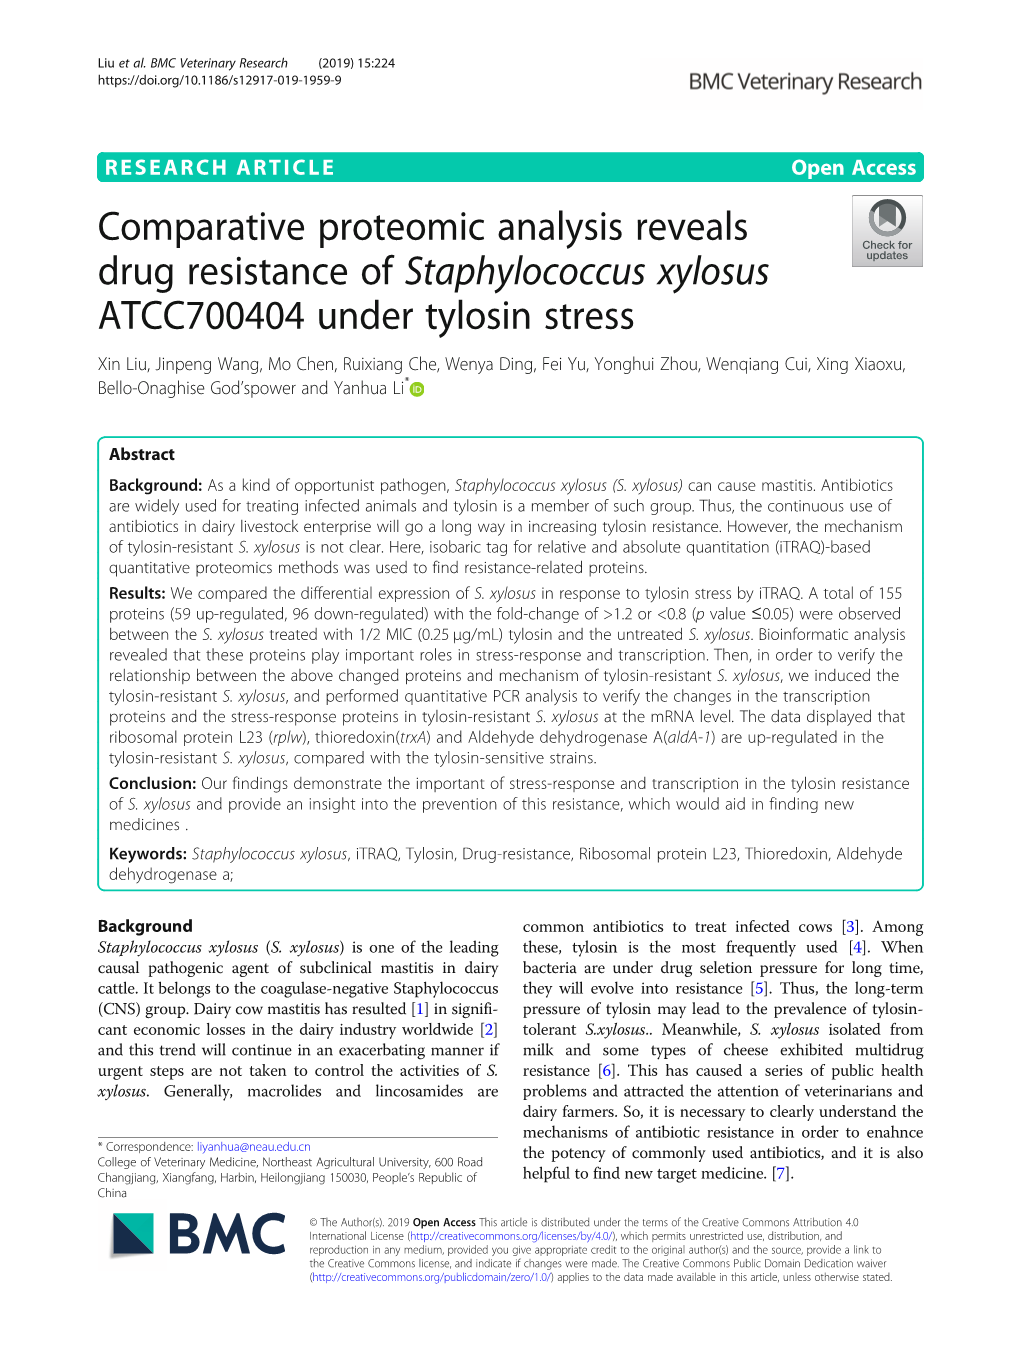 Comparative Proteomic Analysis Reveals Drug Resistance Of